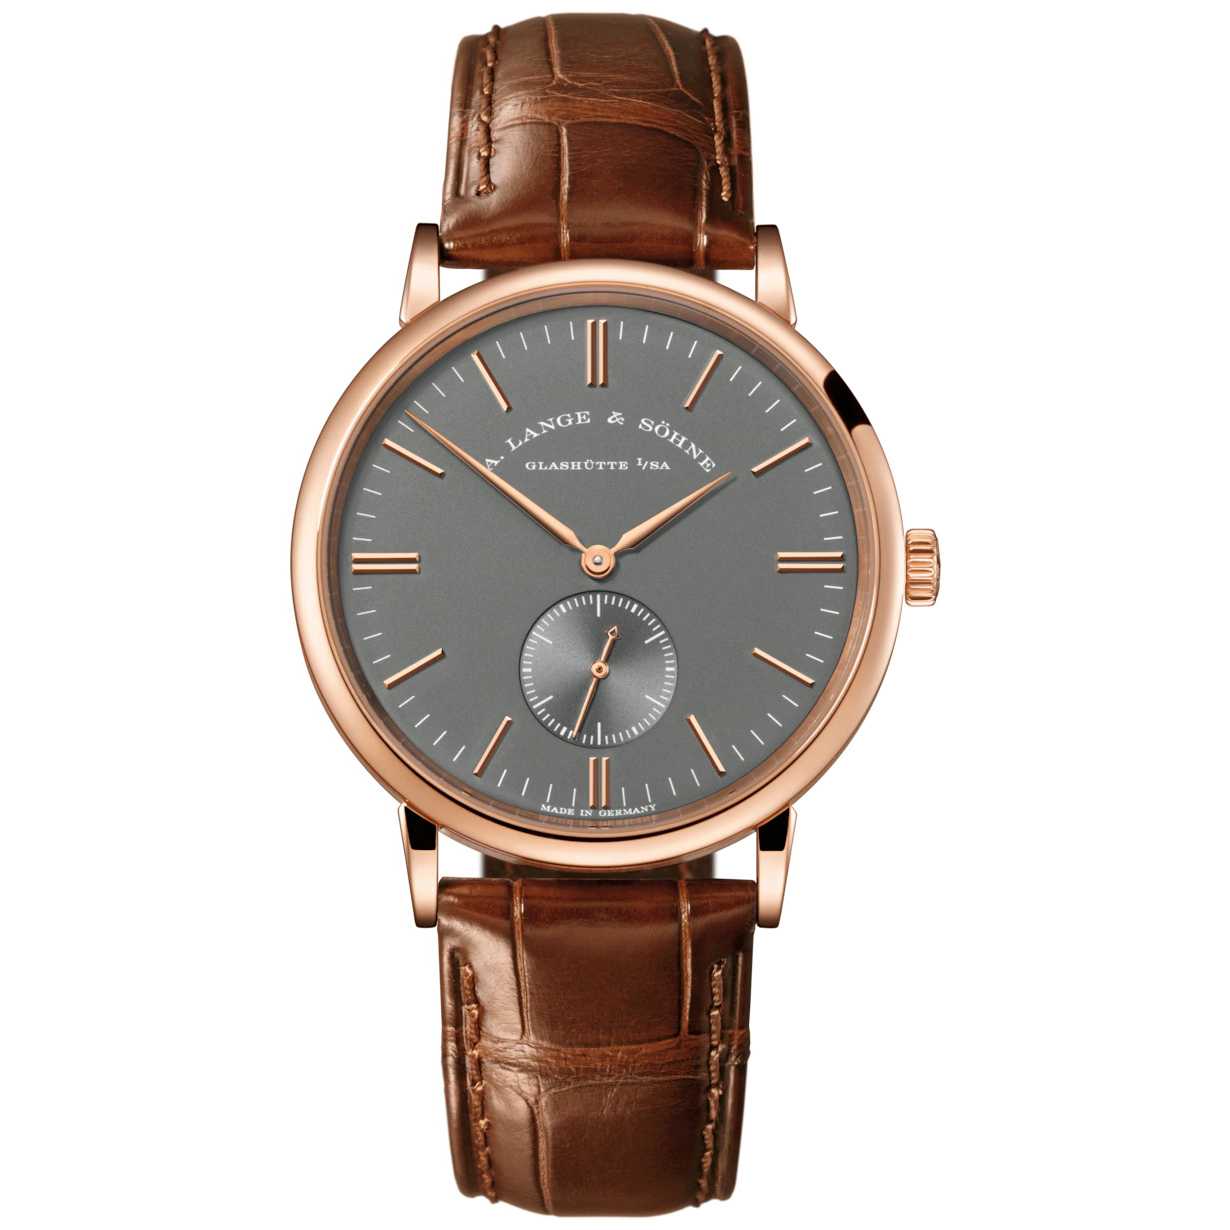 A. Lange & Söhne Saxonia Grey Dial Rose Gold 216.033 for $16,920 ...